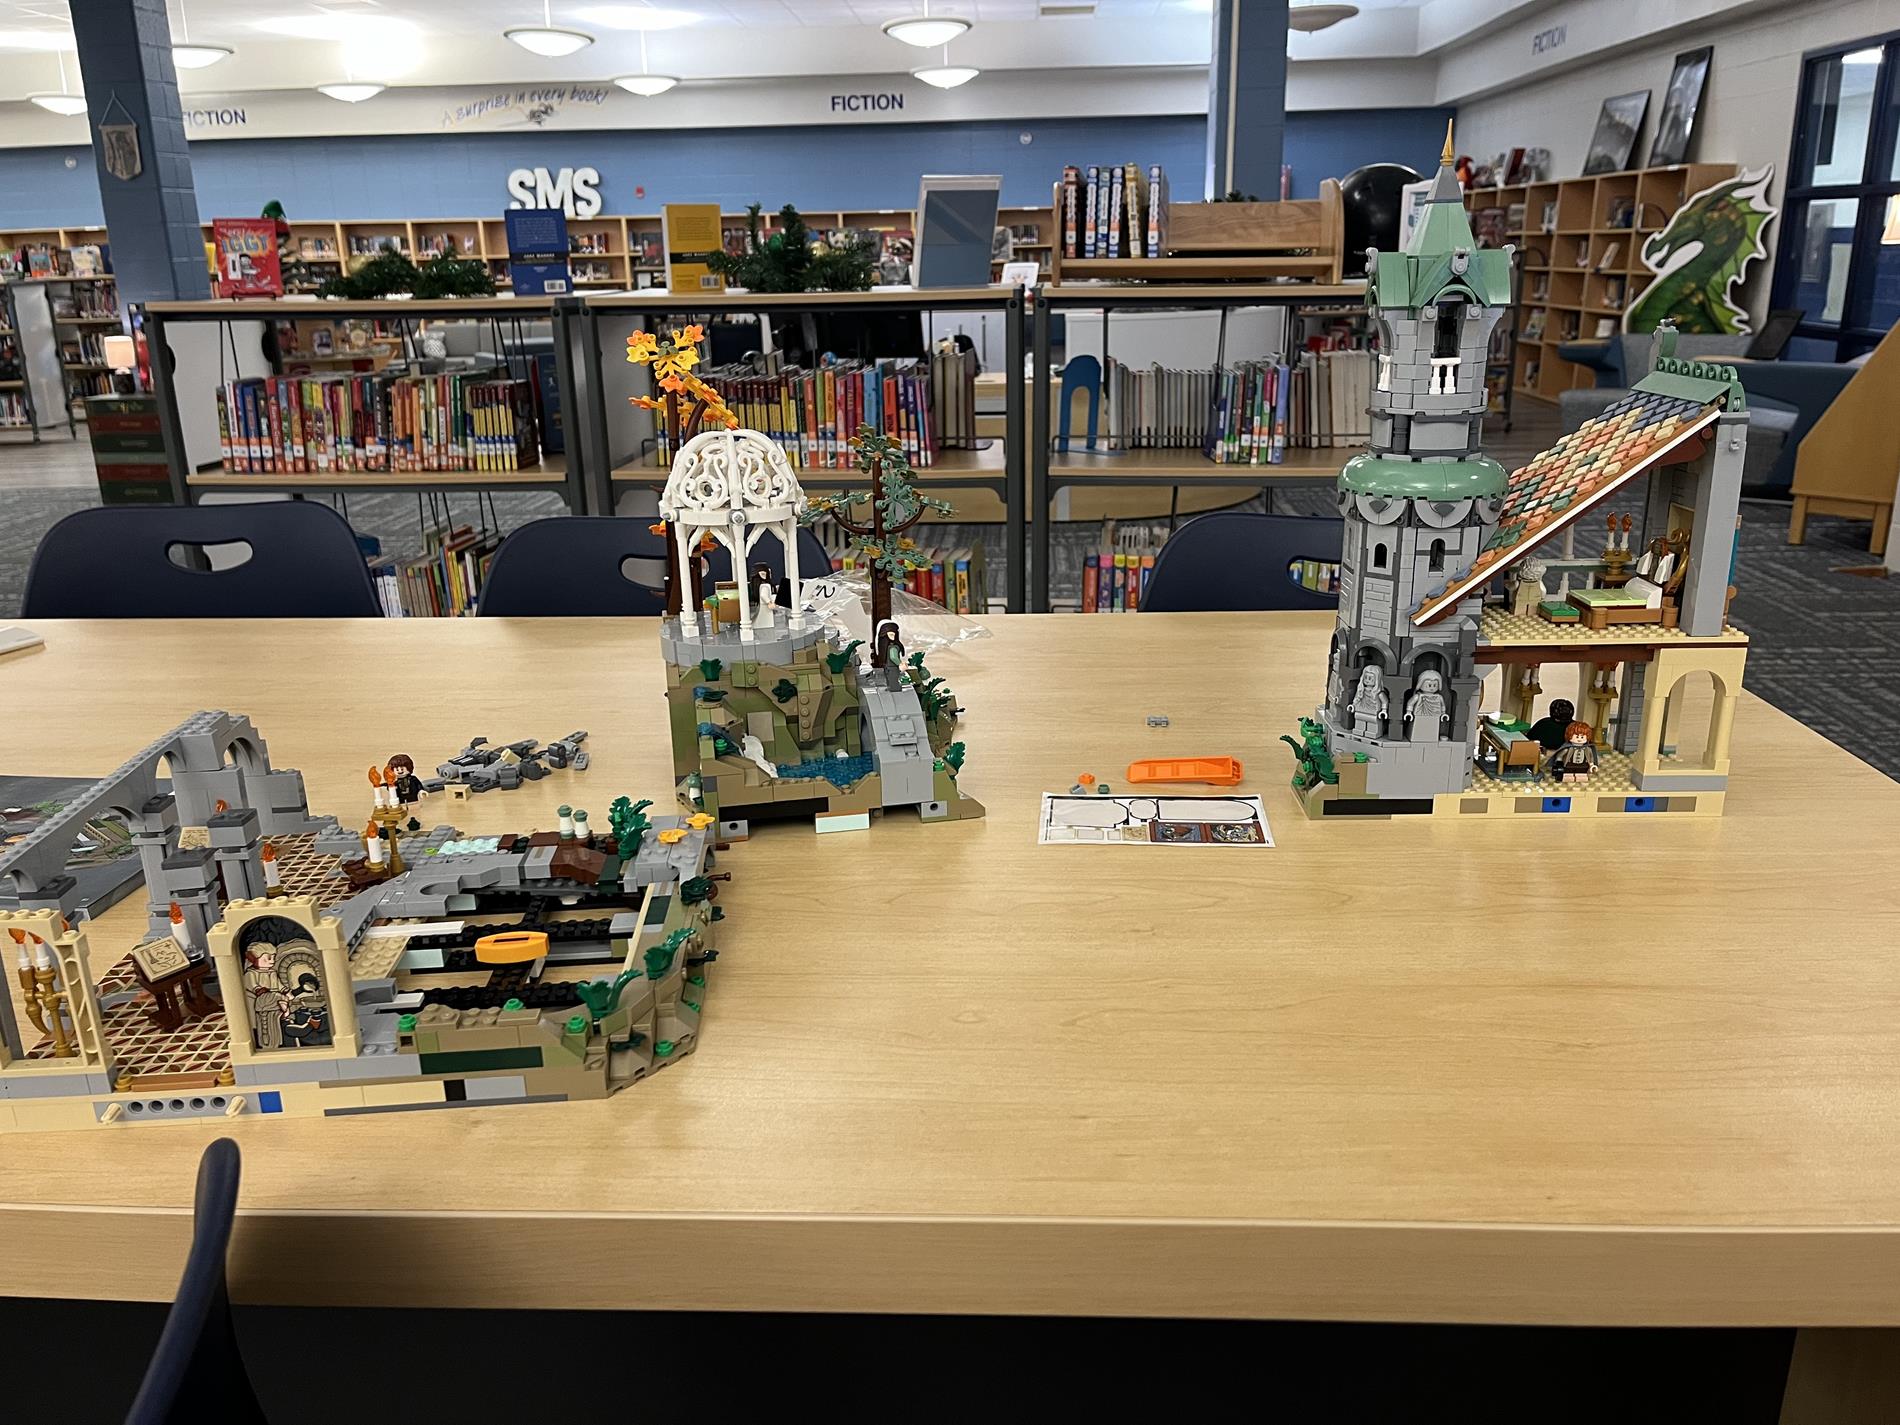 Lego makerspace activity